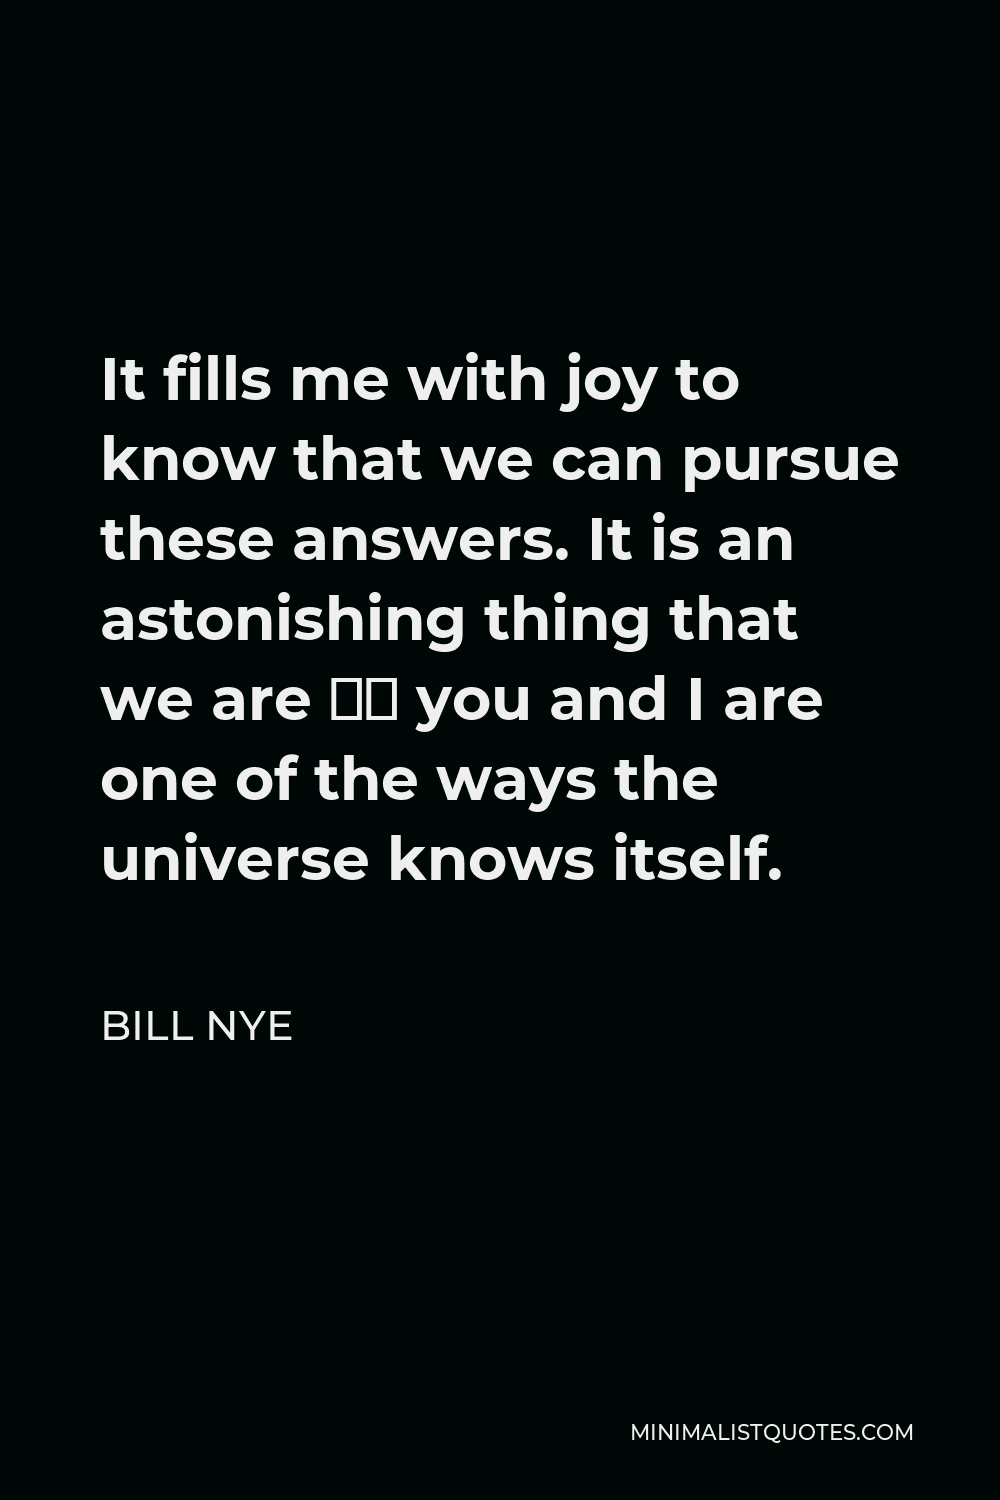 Bill Nye Quote - It fills me with joy to know that we can pursue these answers. It is an astonishing thing that we are — you and I are one of the ways the universe knows itself.